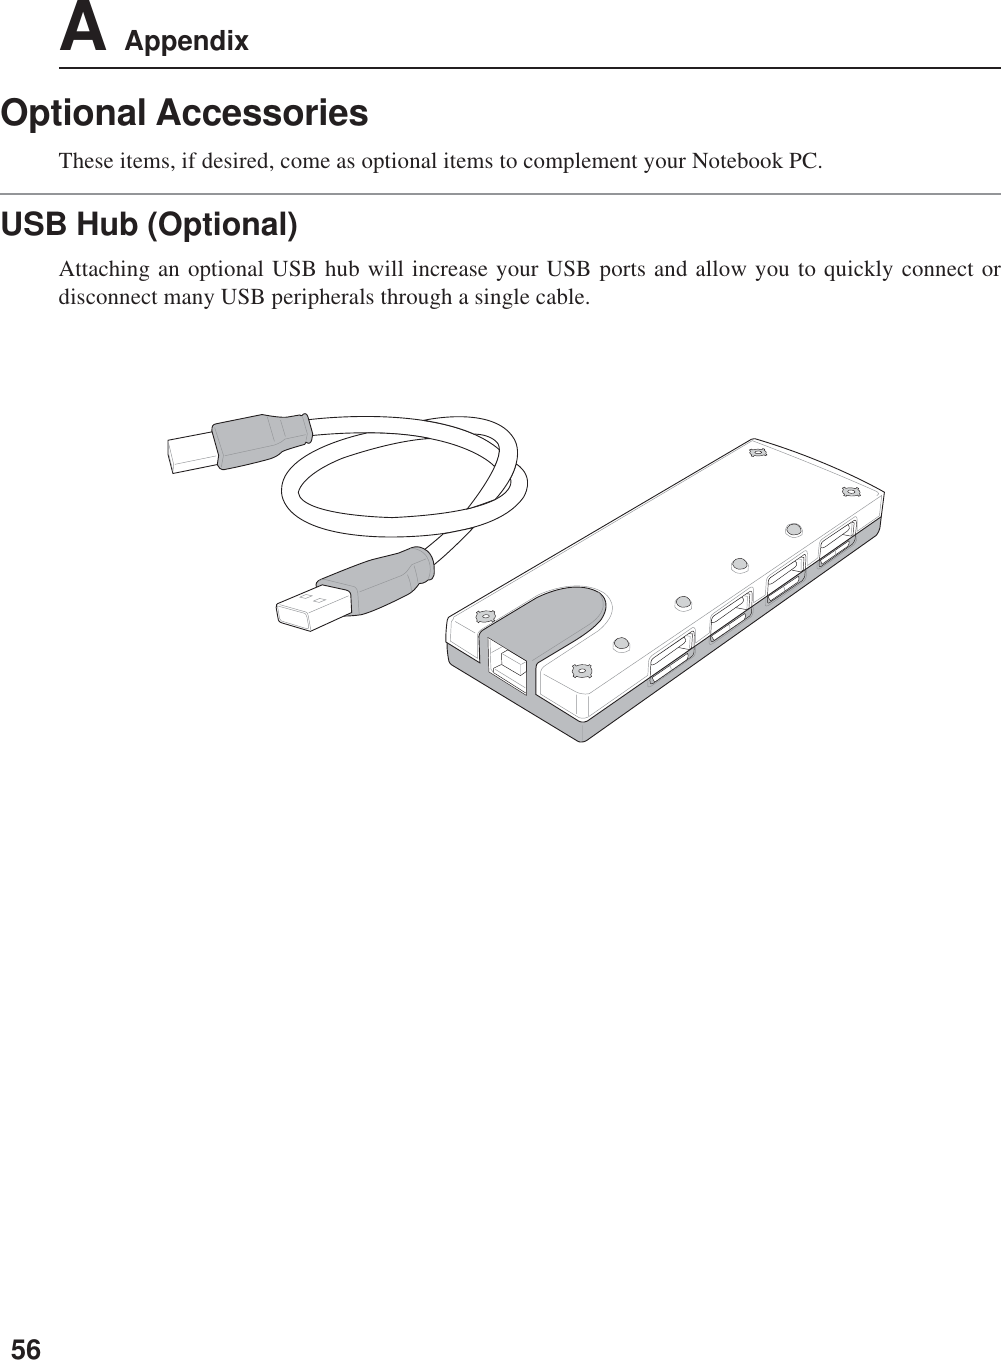 56A AppendixOptional AccessoriesThese items, if desired, come as optional items to complement your Notebook PC.USB Hub (Optional)Attaching an optional USB hub will increase your USB ports and allow you to quickly connect ordisconnect many USB peripherals through a single cable.